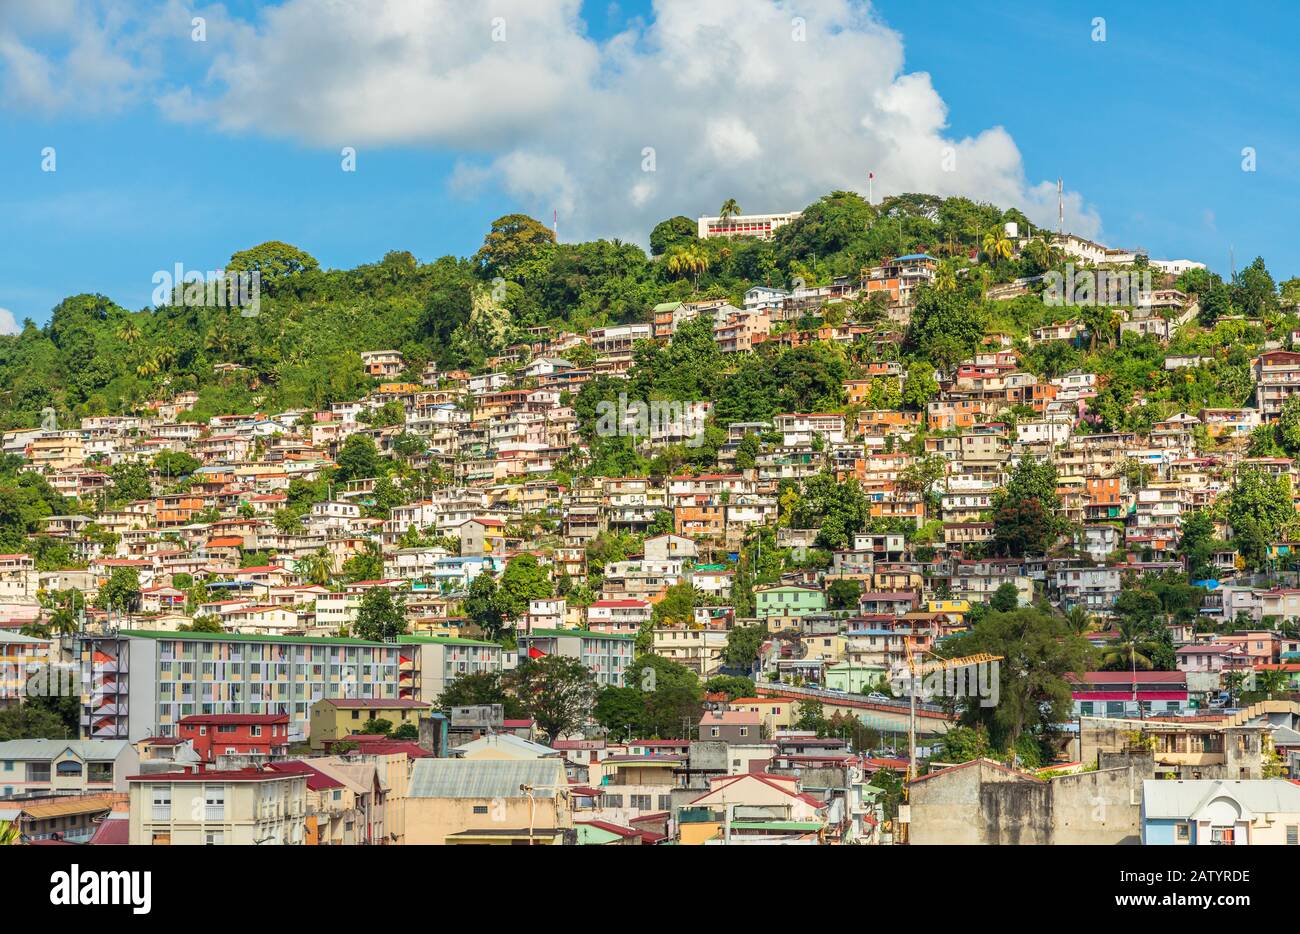 Lots of shantytown favelas on the hill, Fort De France, Martinique, French overseas department Stock Photo